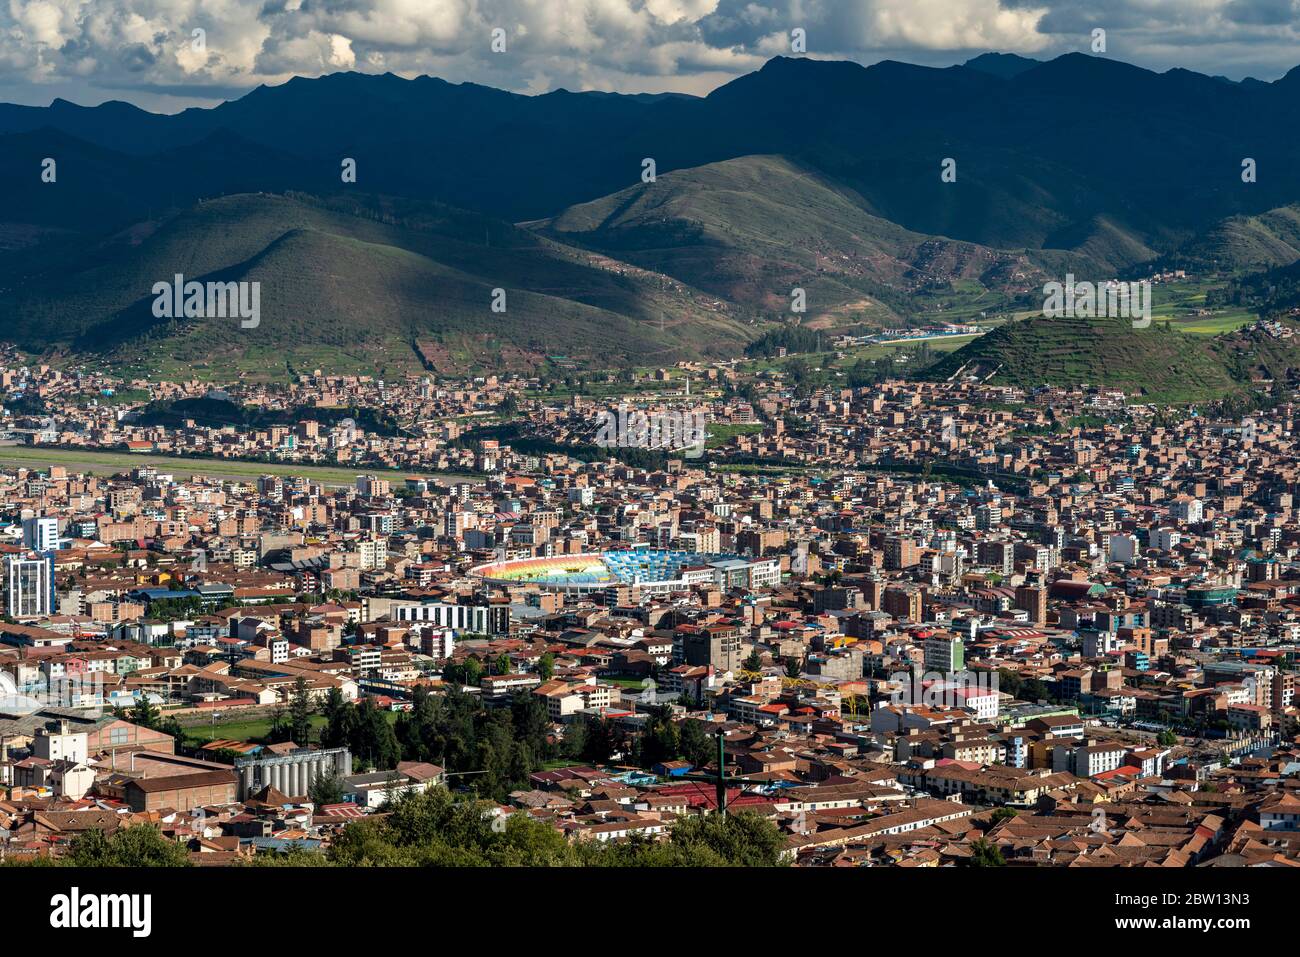 HIgh angle view of Cusco Peru with soccer stadium and airport runway. Stock Photo